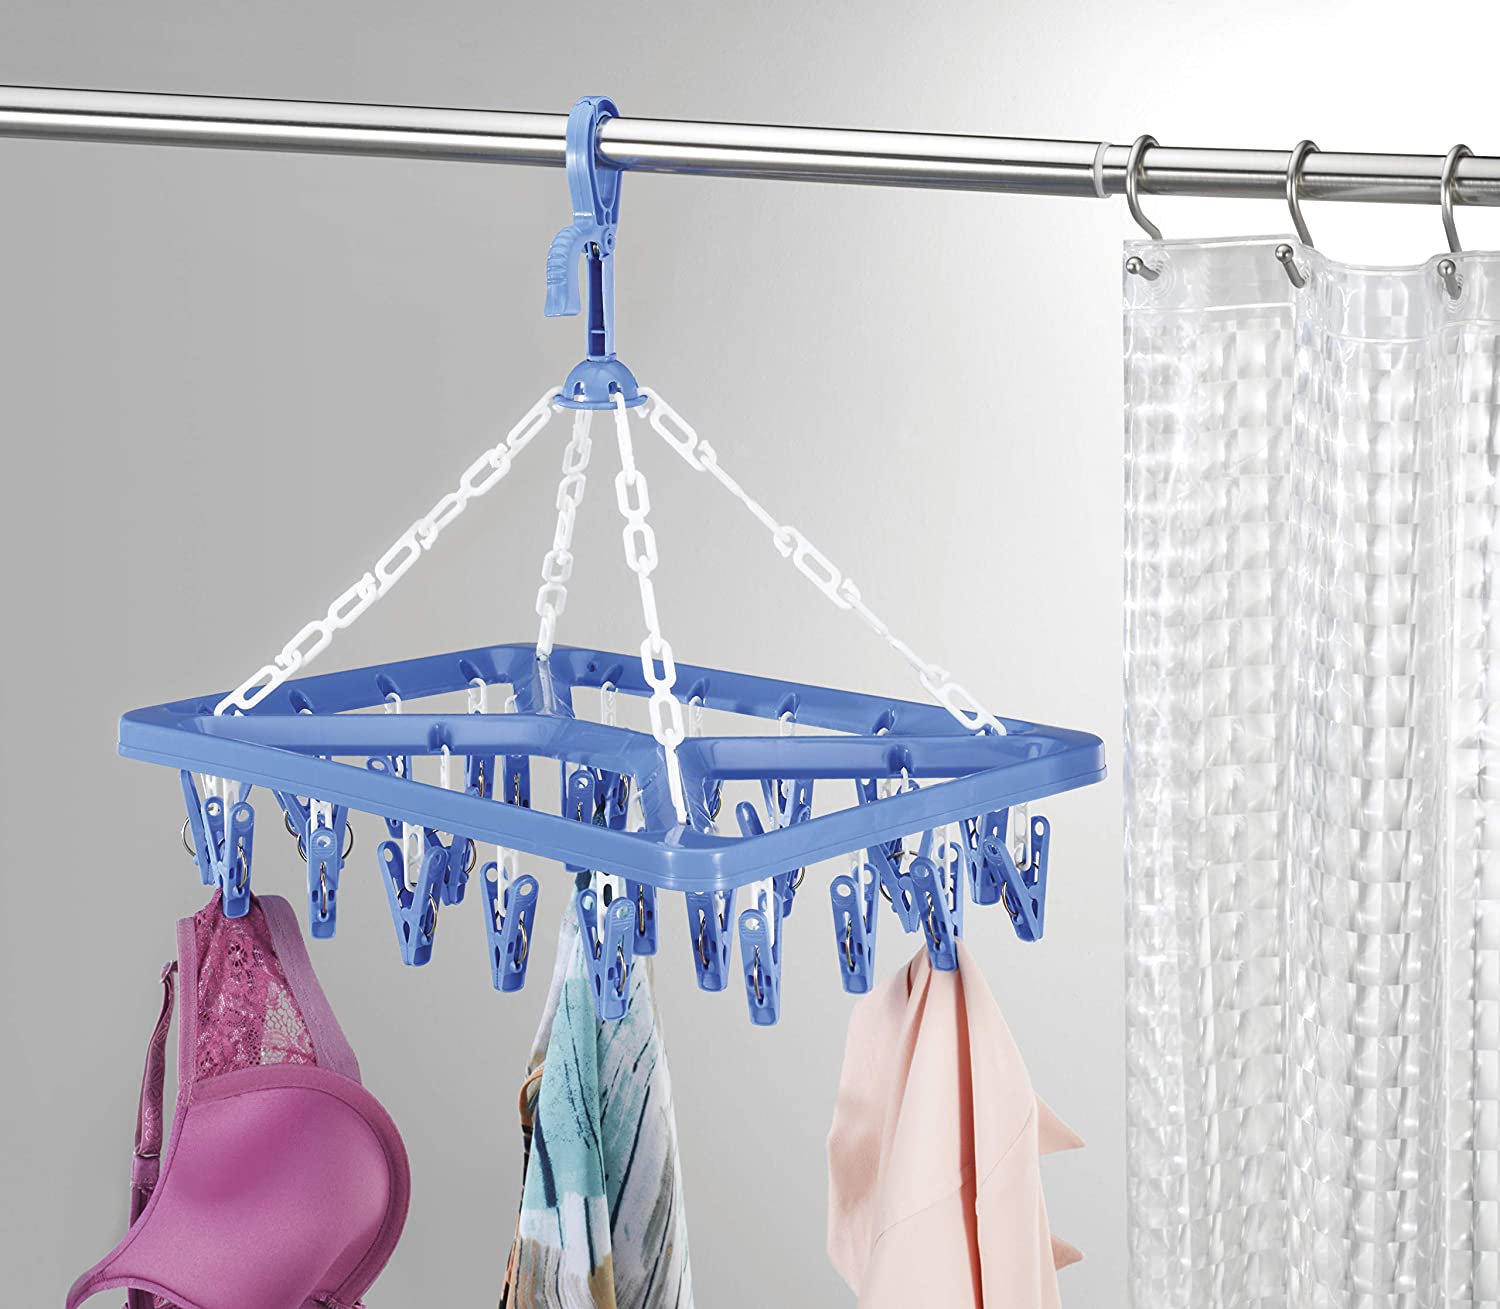 Blue drip-style drying rack for clothes